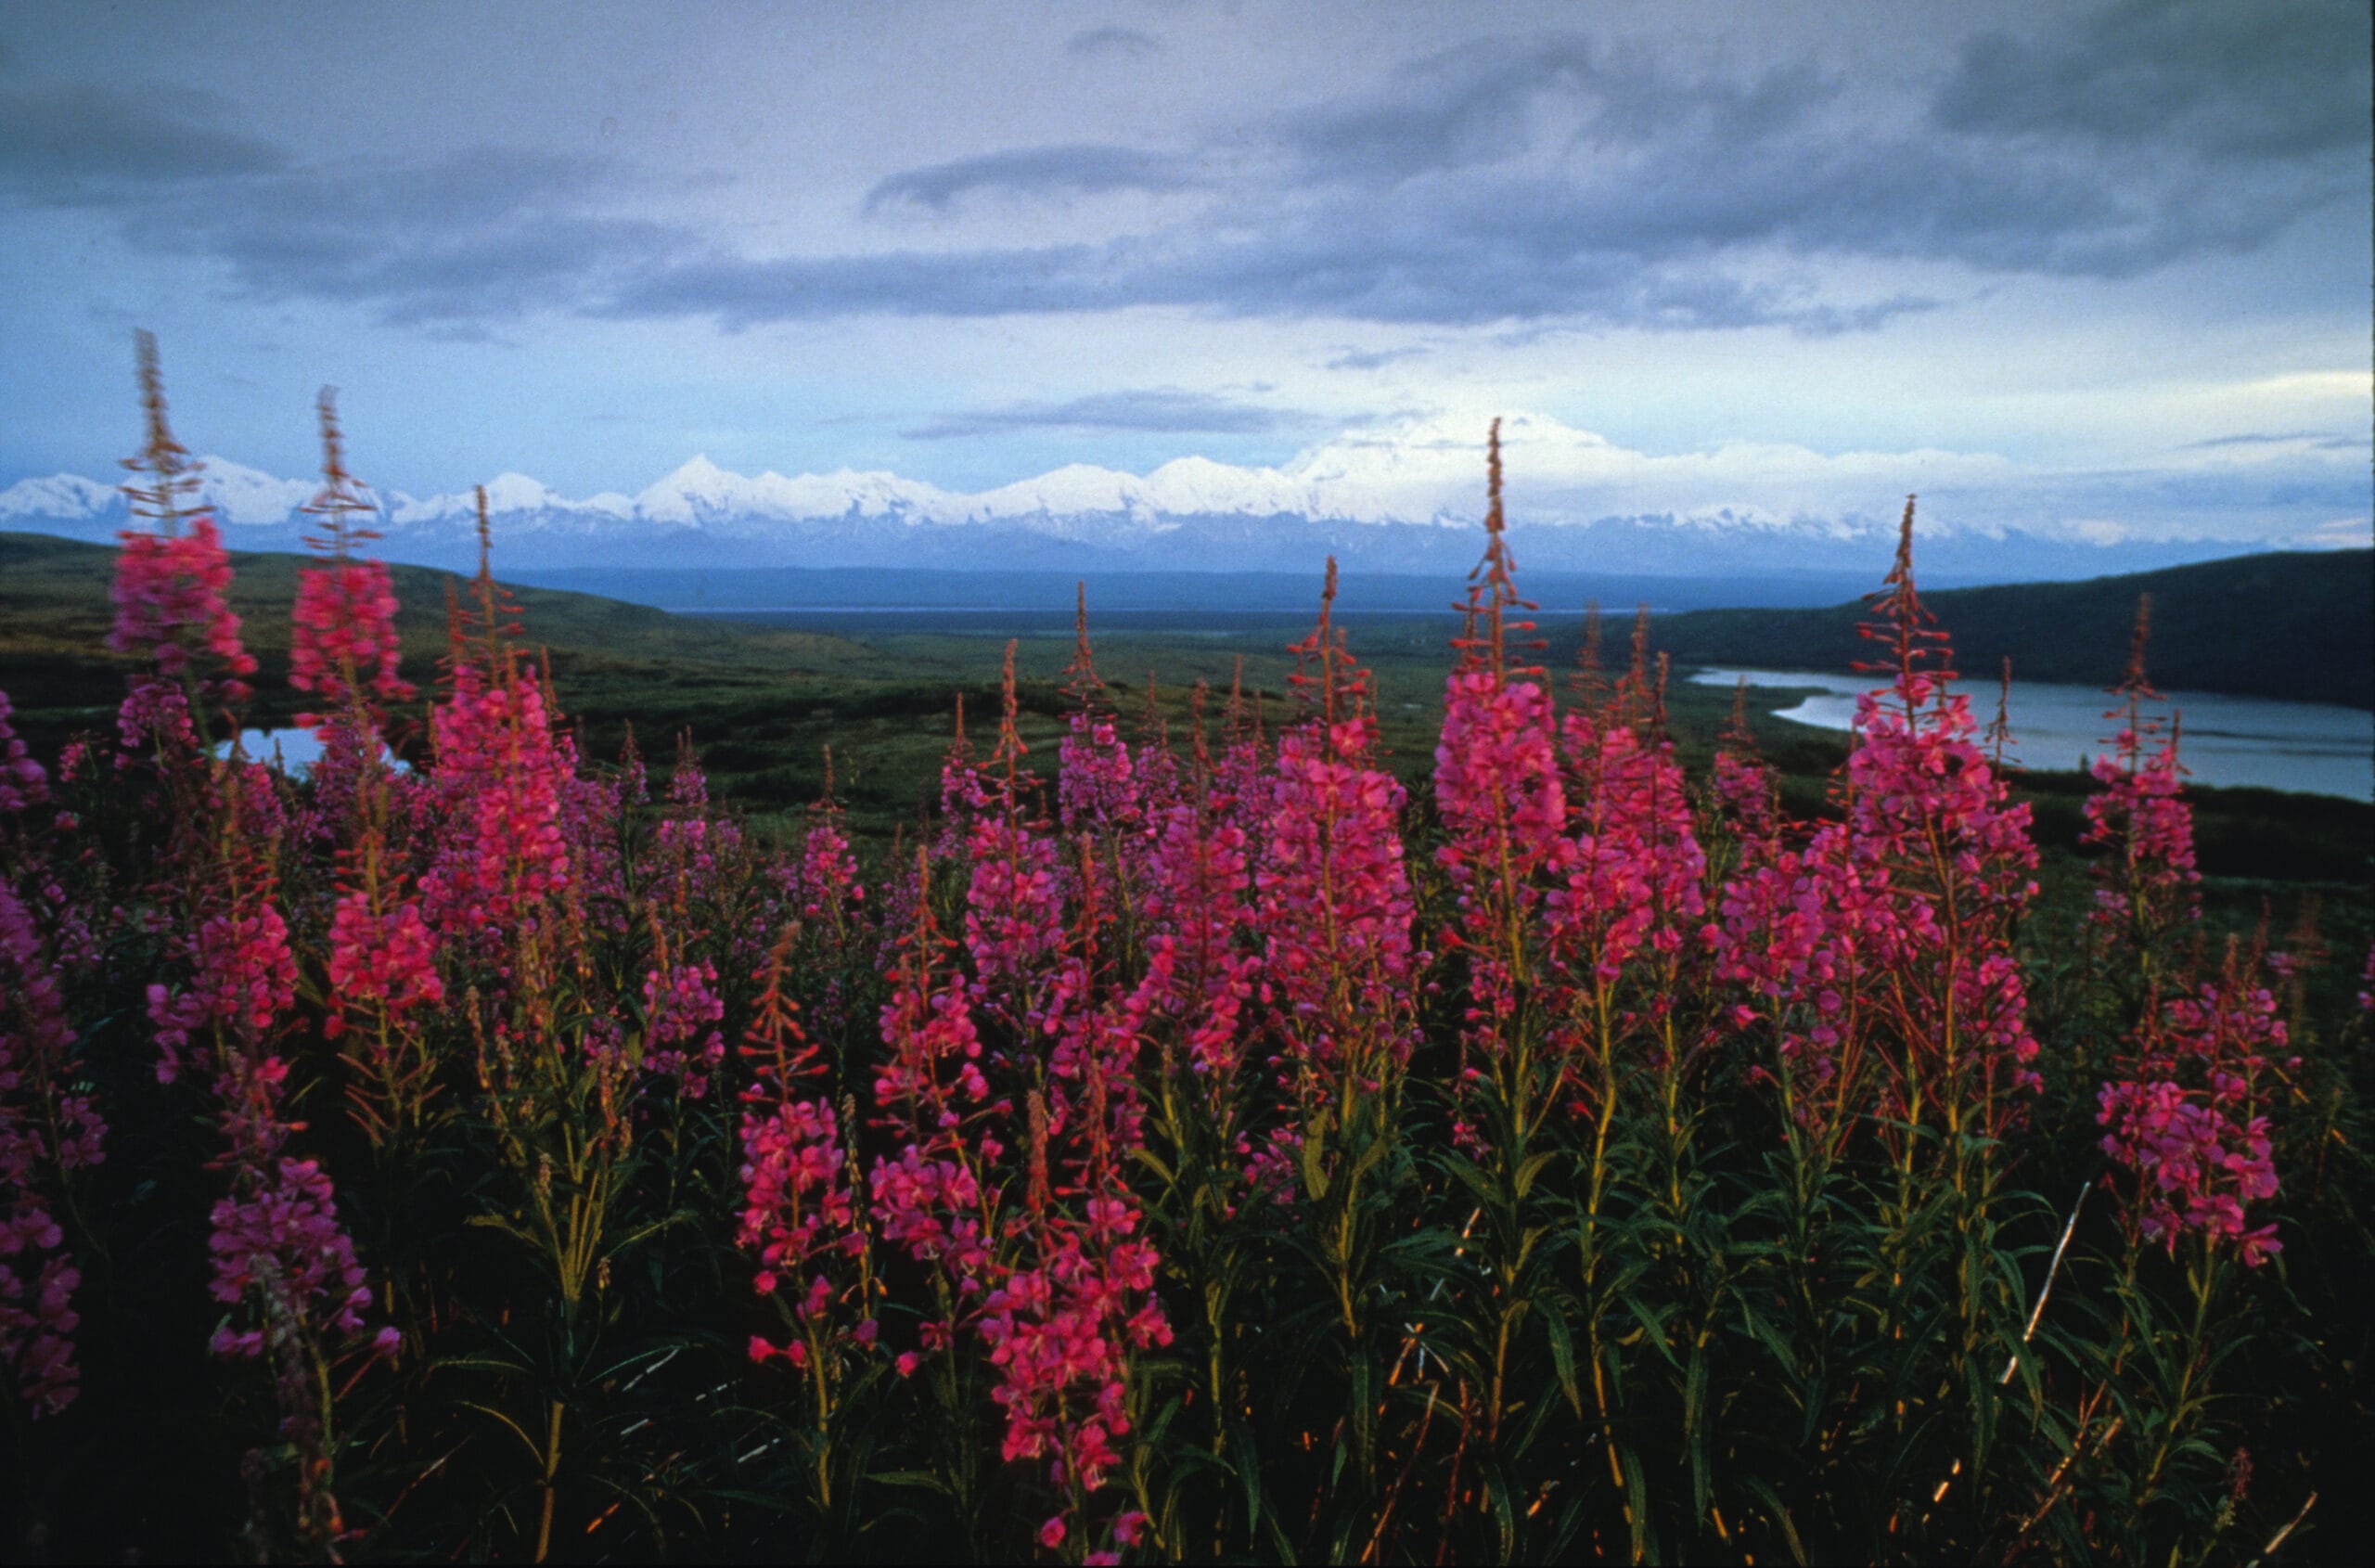 A field of pink flowers with mountains in the background.